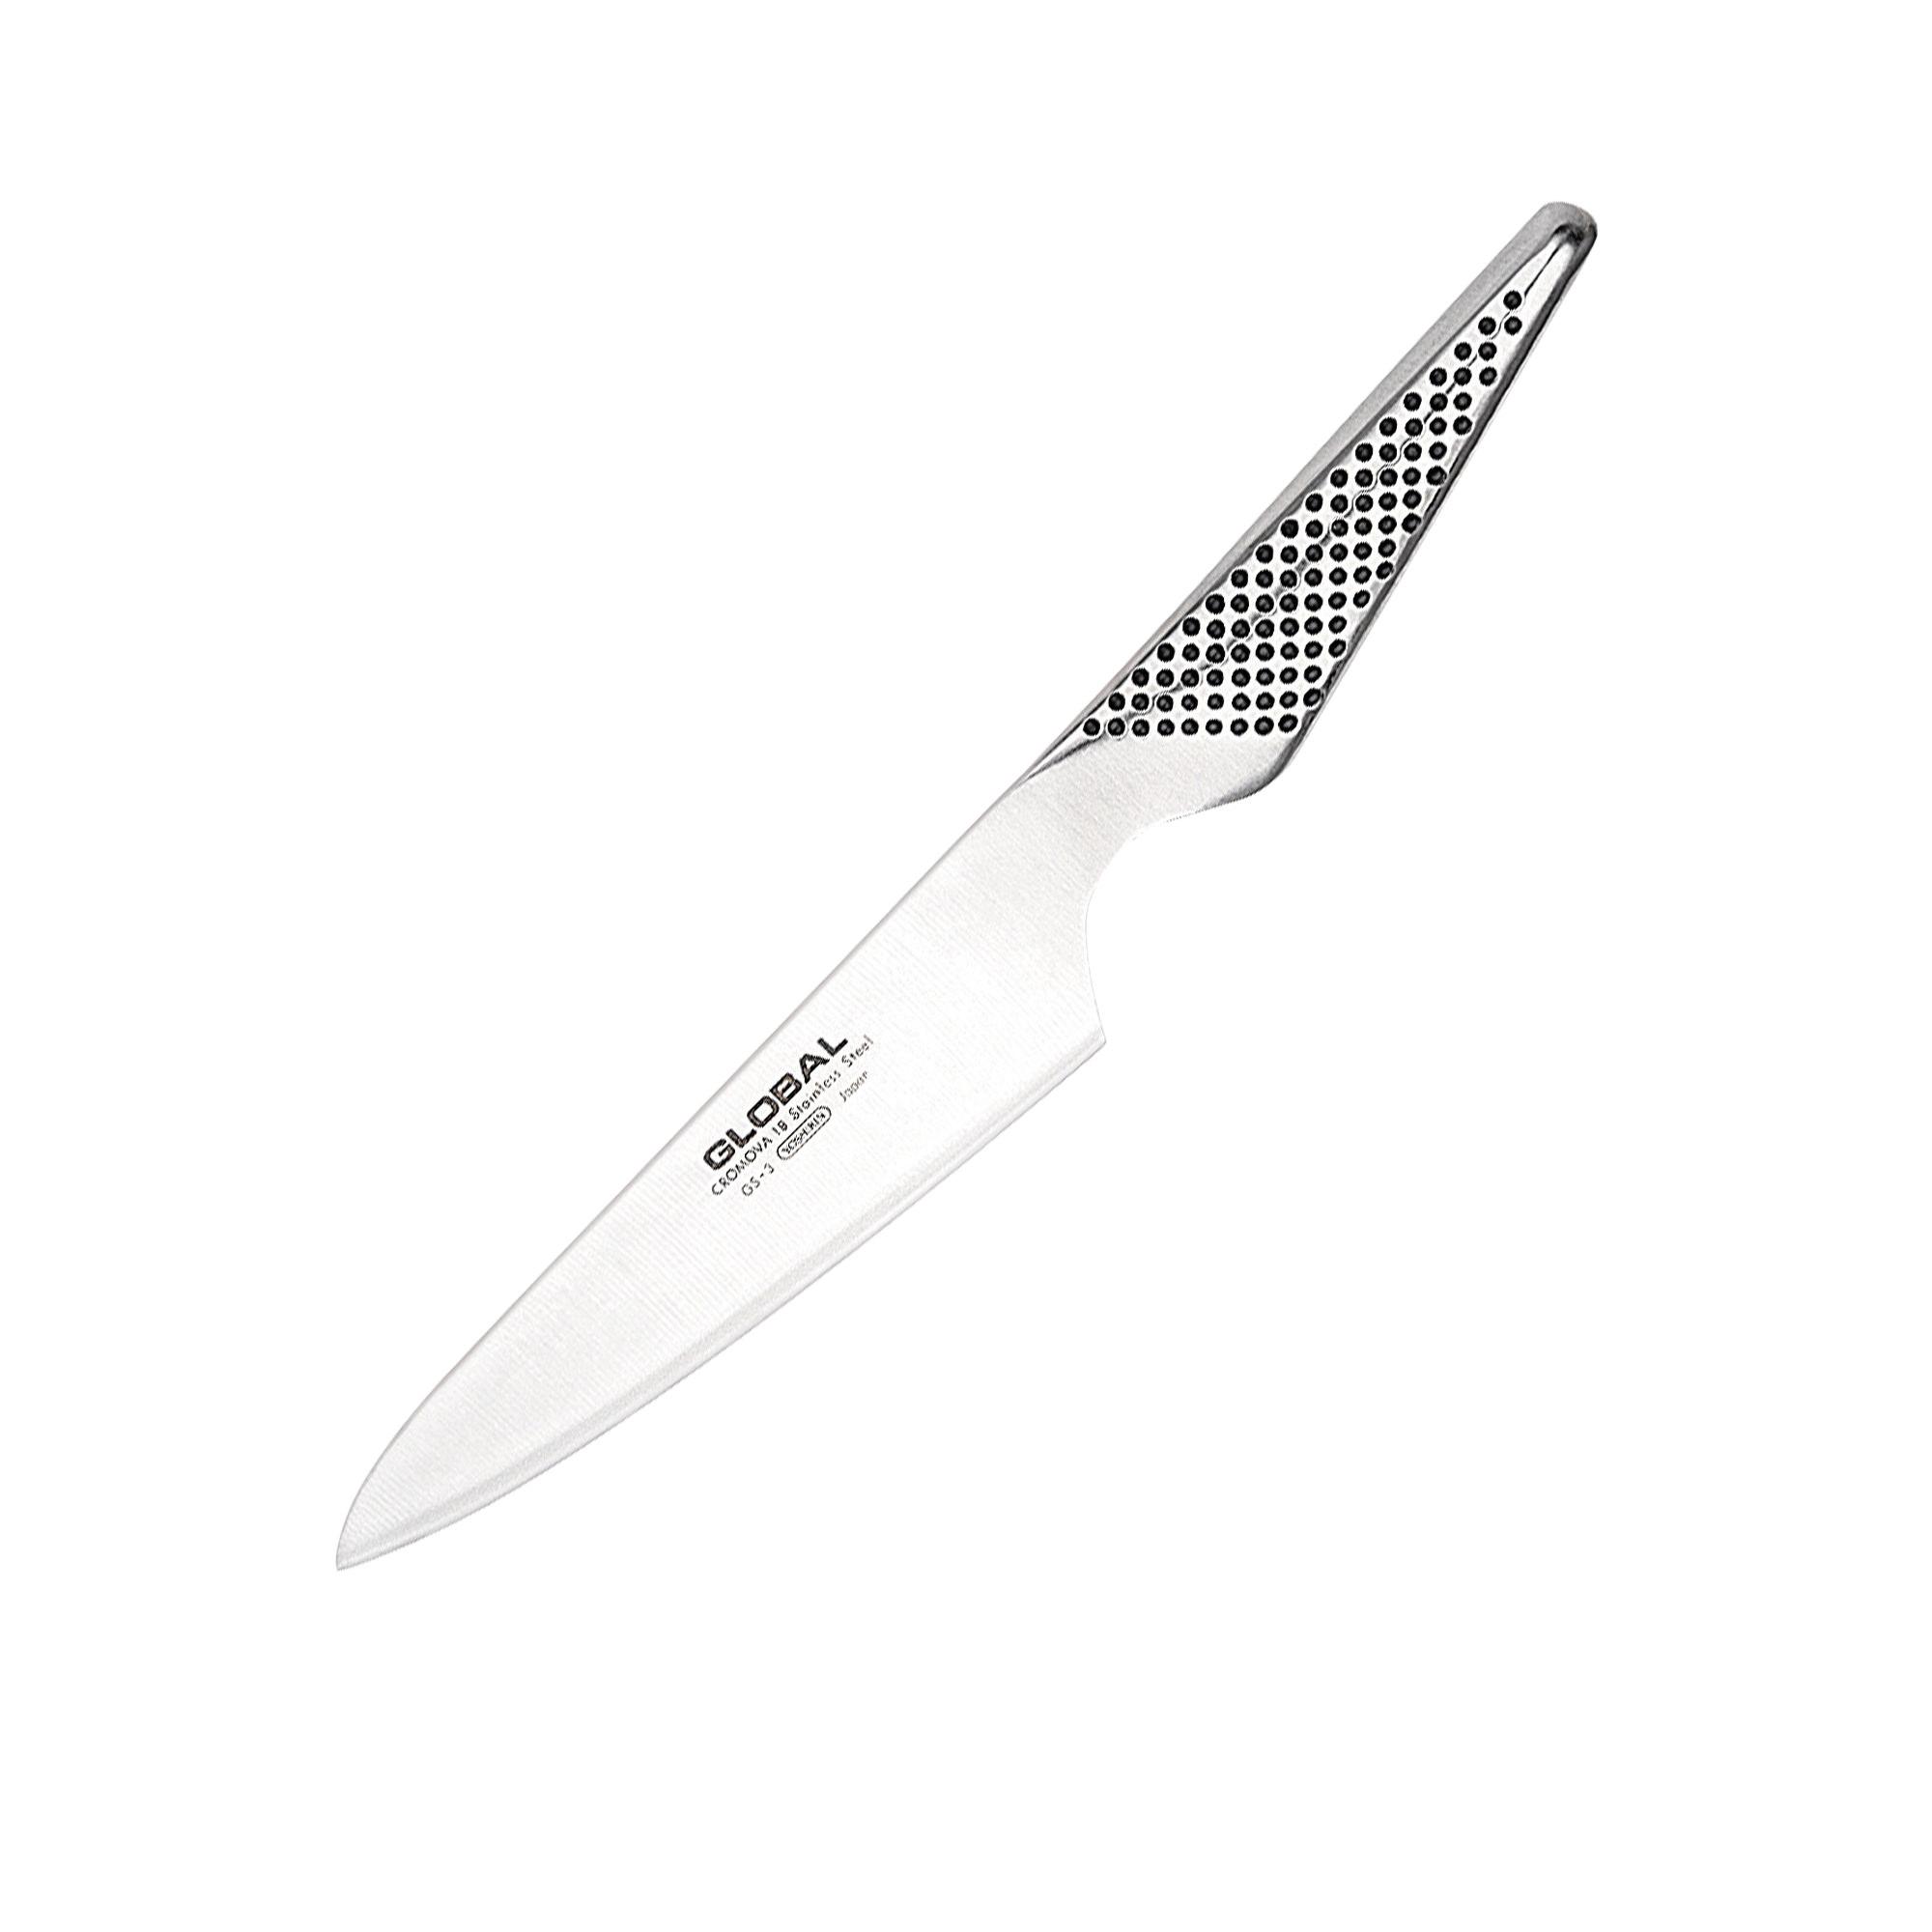 Global GS-3 Cook's Knife 13cm Image 1